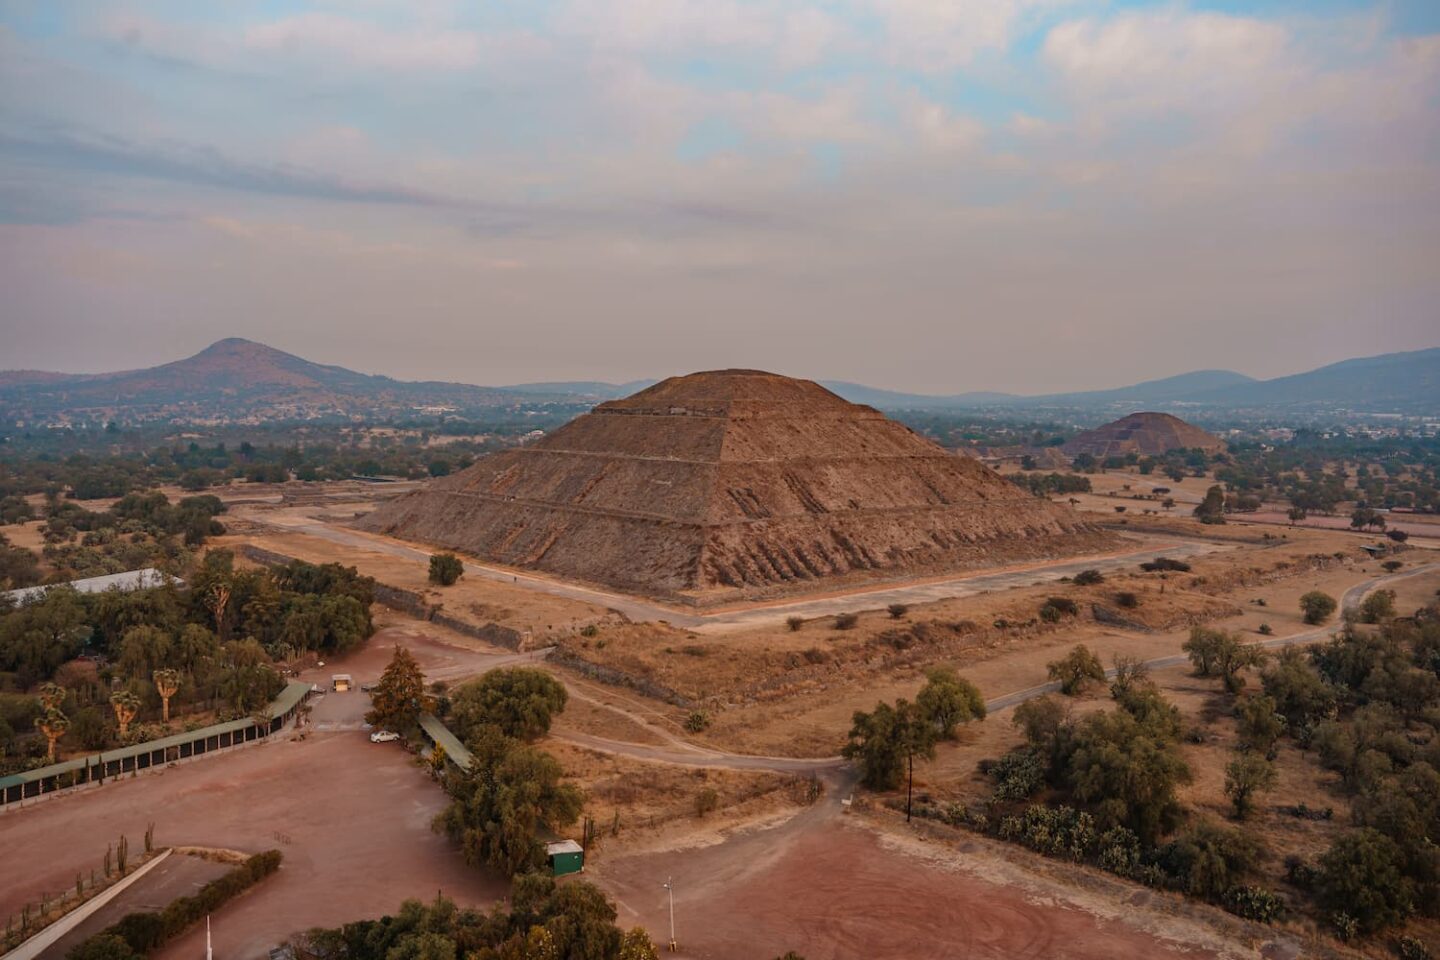 Visiting Teotihuacan is a must activity on your 3 weeks in Mexico itinerary.